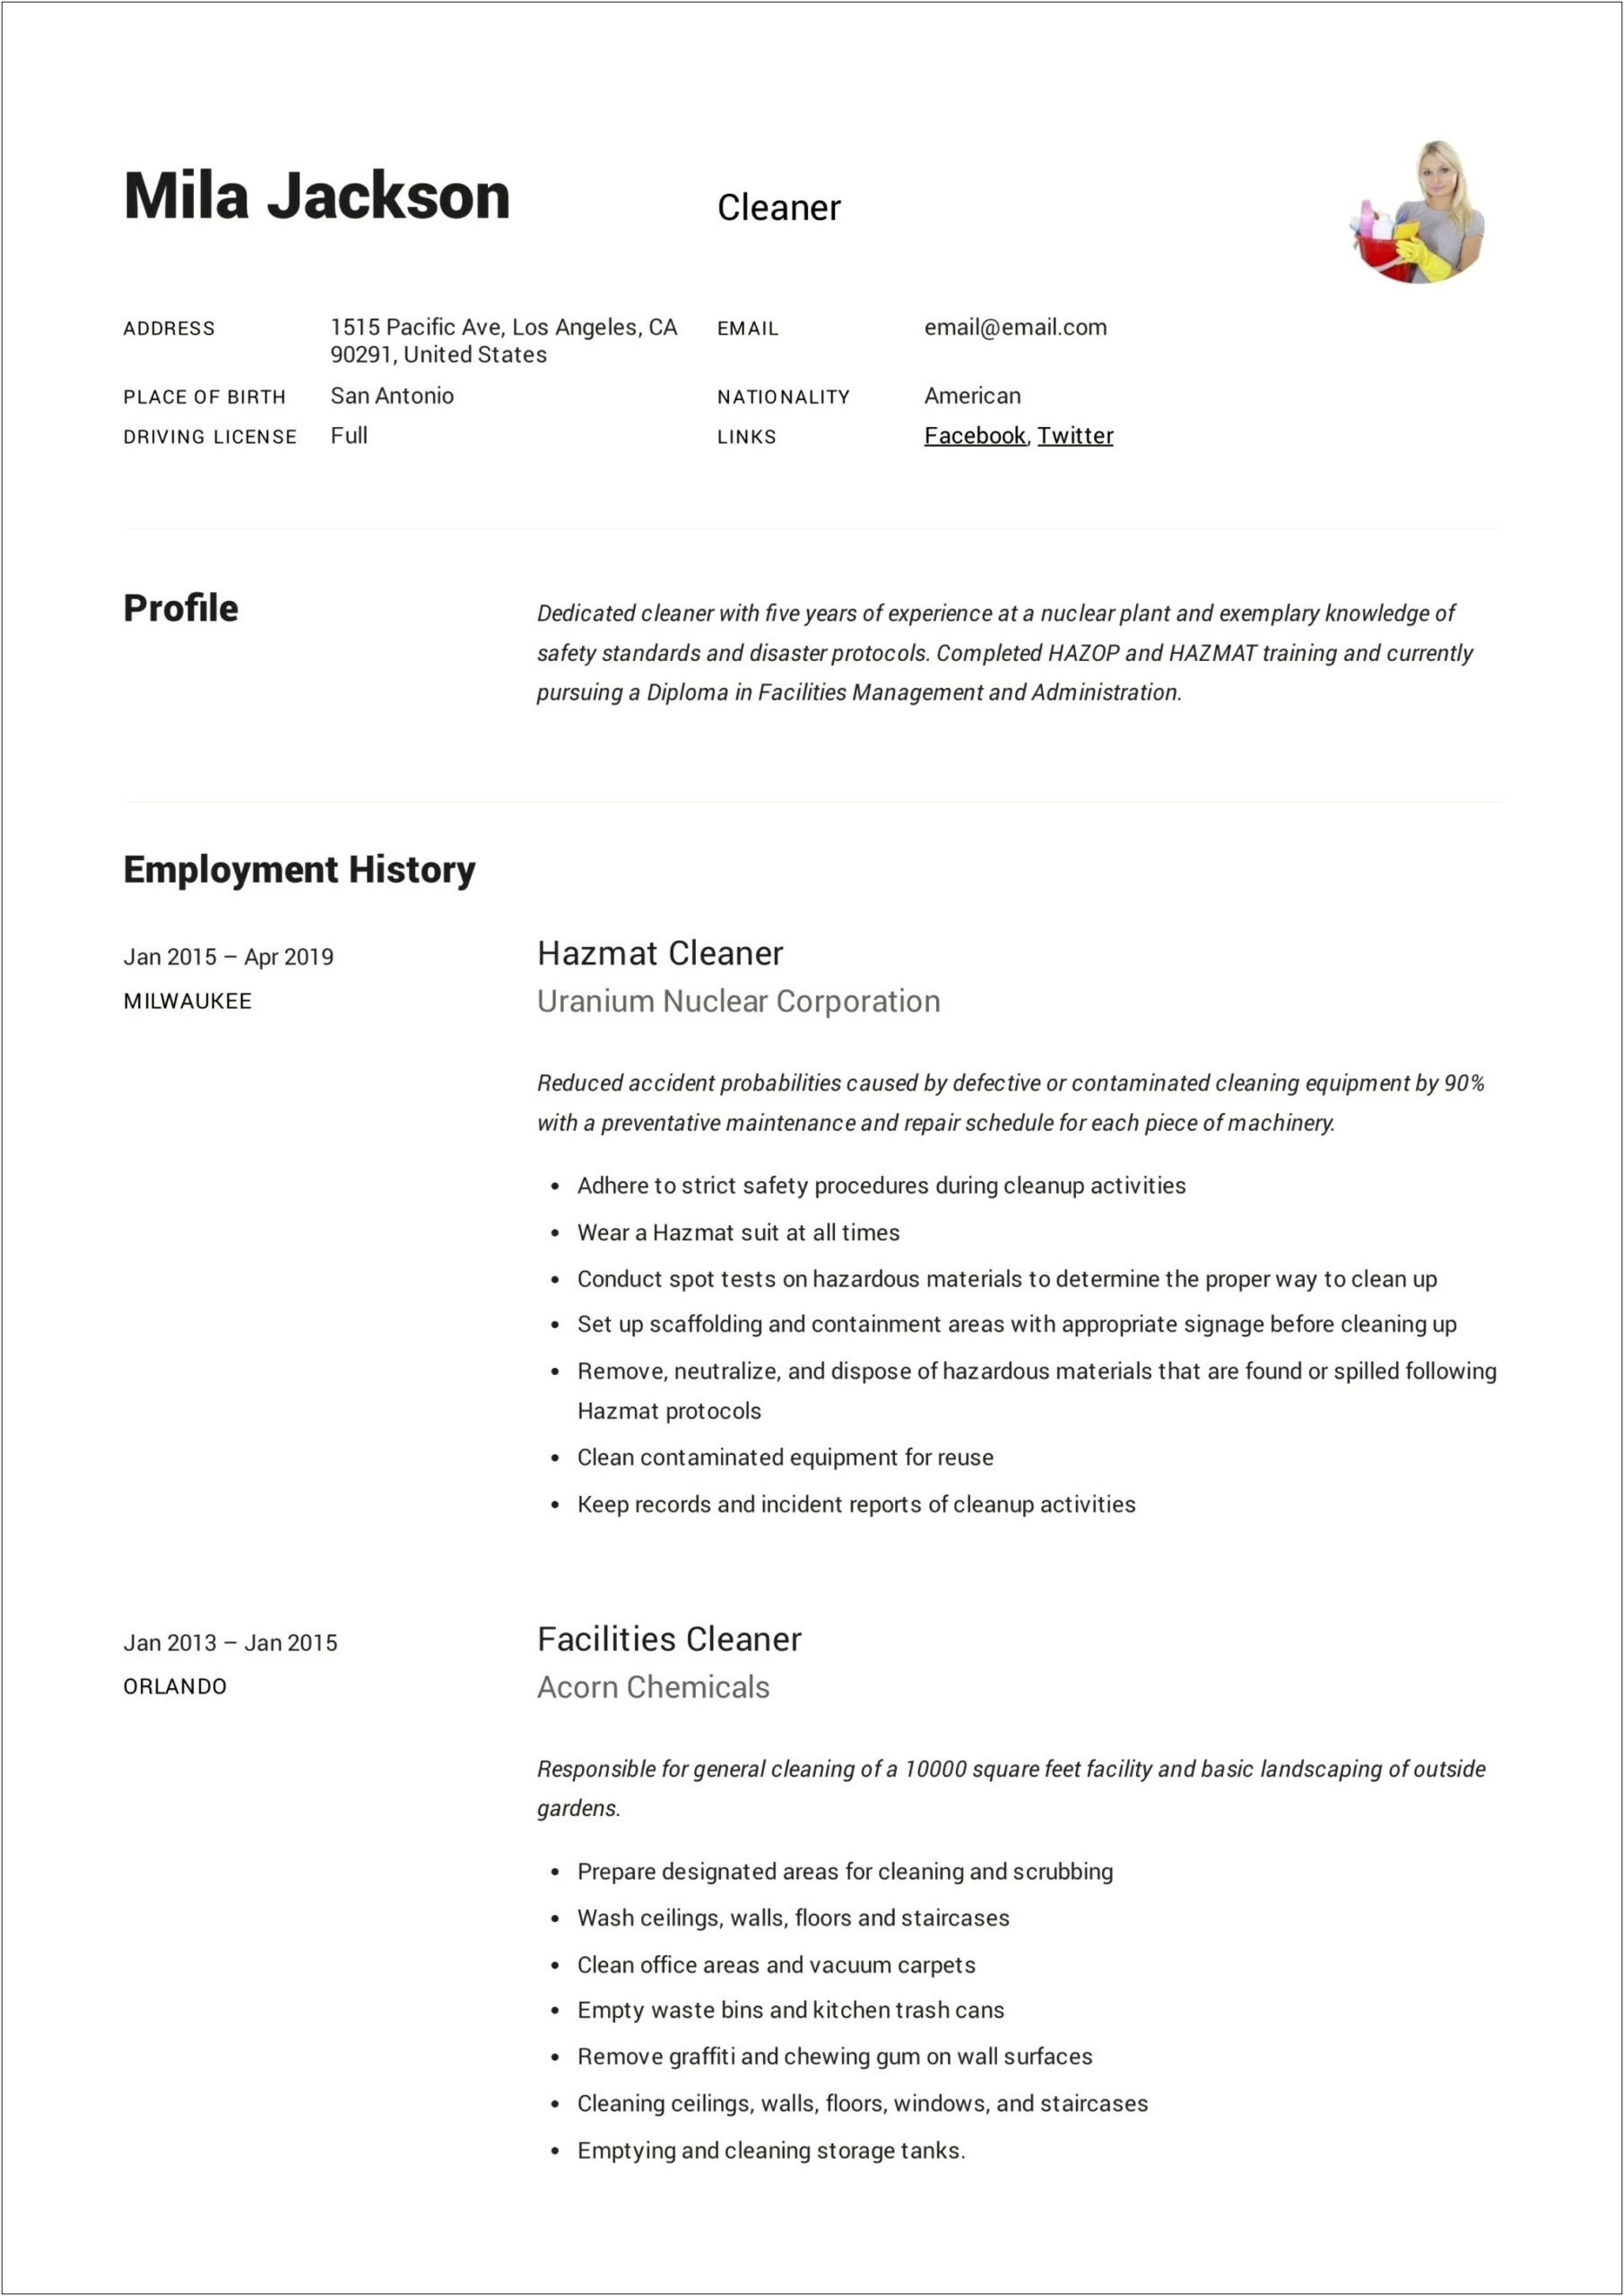 Resume For Cleaning Jobs Samples